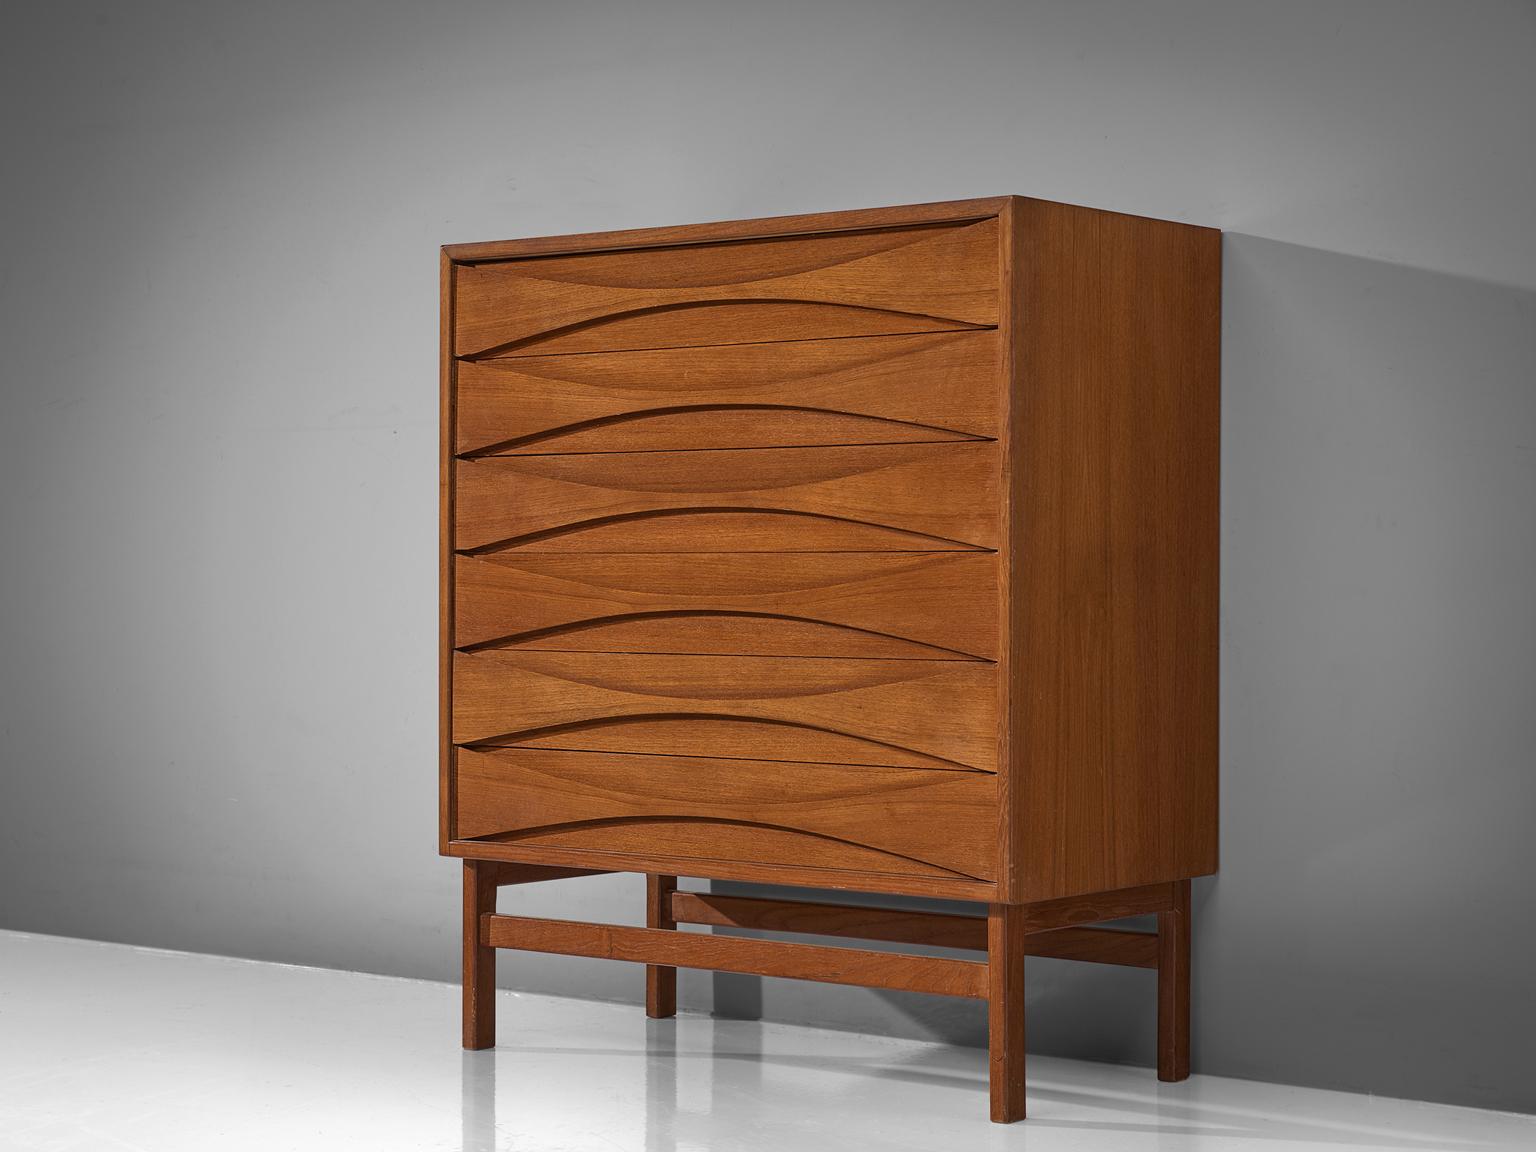 Arne Vodder for NC Møbler, teak, Denmark, 1959.

Iconic chest of drawers in oak by Danish designer Arne Vodder and executed by NC Møbler. The typical refined Vodder details can be found on this cabinet in the characteristic drawers and the handles